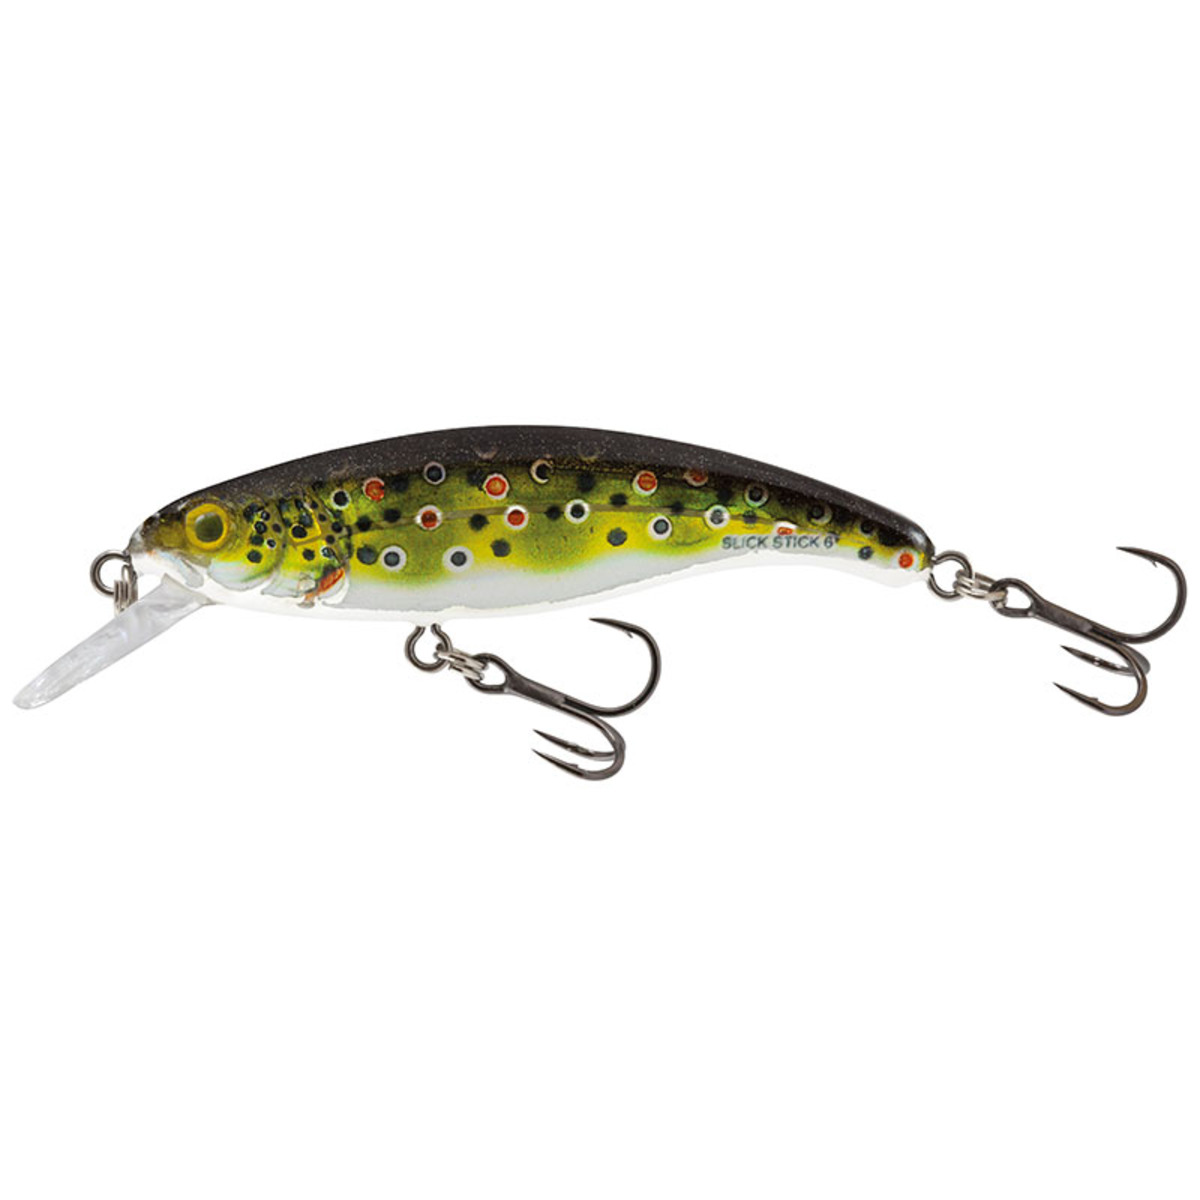 Salmo Slick Stick Floating - 6 Cm - Holographic Brownie